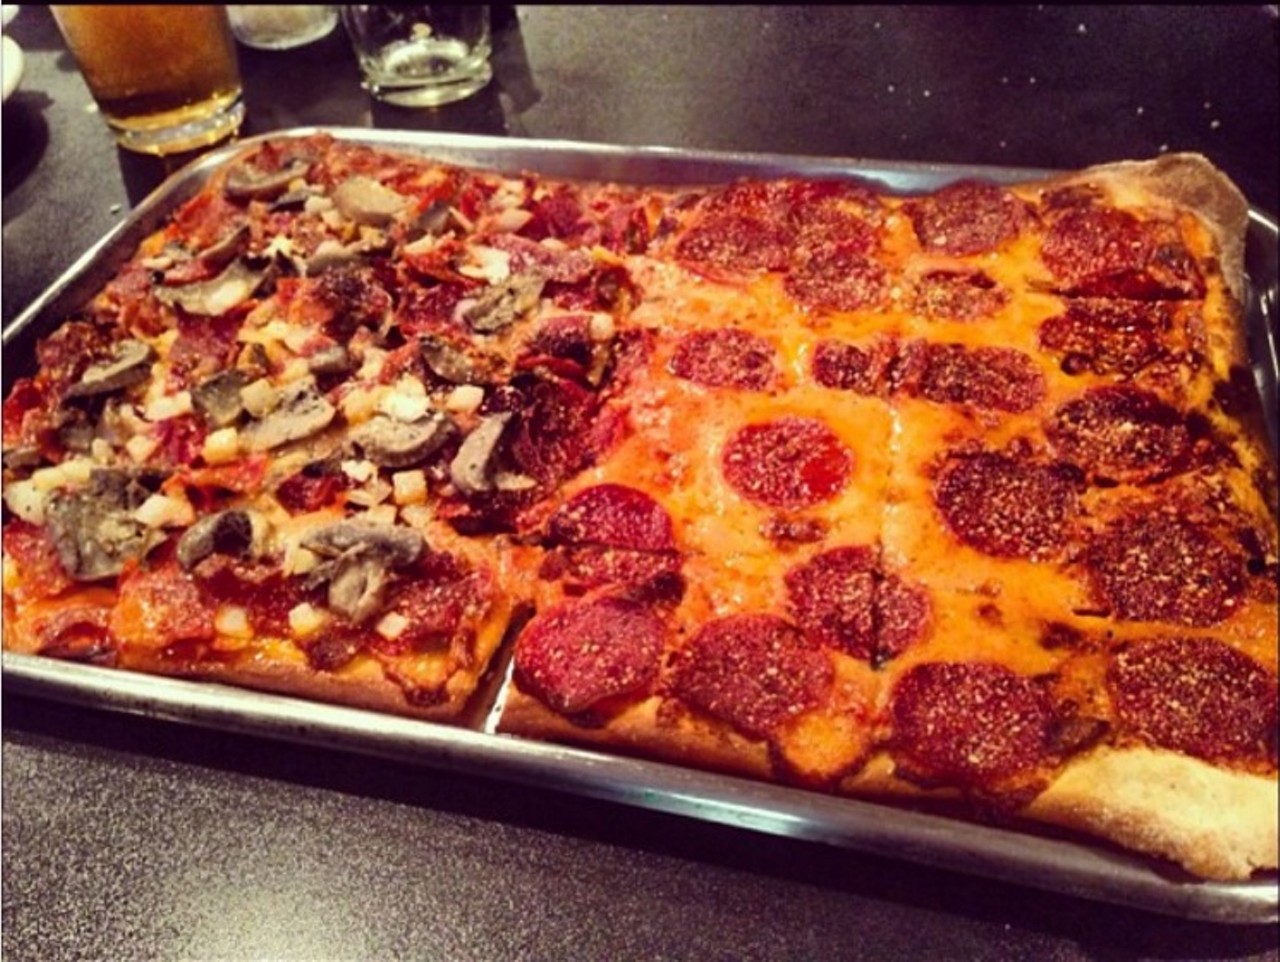 Pirrone's Pizza
Locations in St. Peters and Florissant
Another great place to try St. Louis-style pizza is Pirrone's. You won't find pre-made crust here -- every pizza is made to order. Enjoy! Photo courtesy of Instagram / ashleycaito.